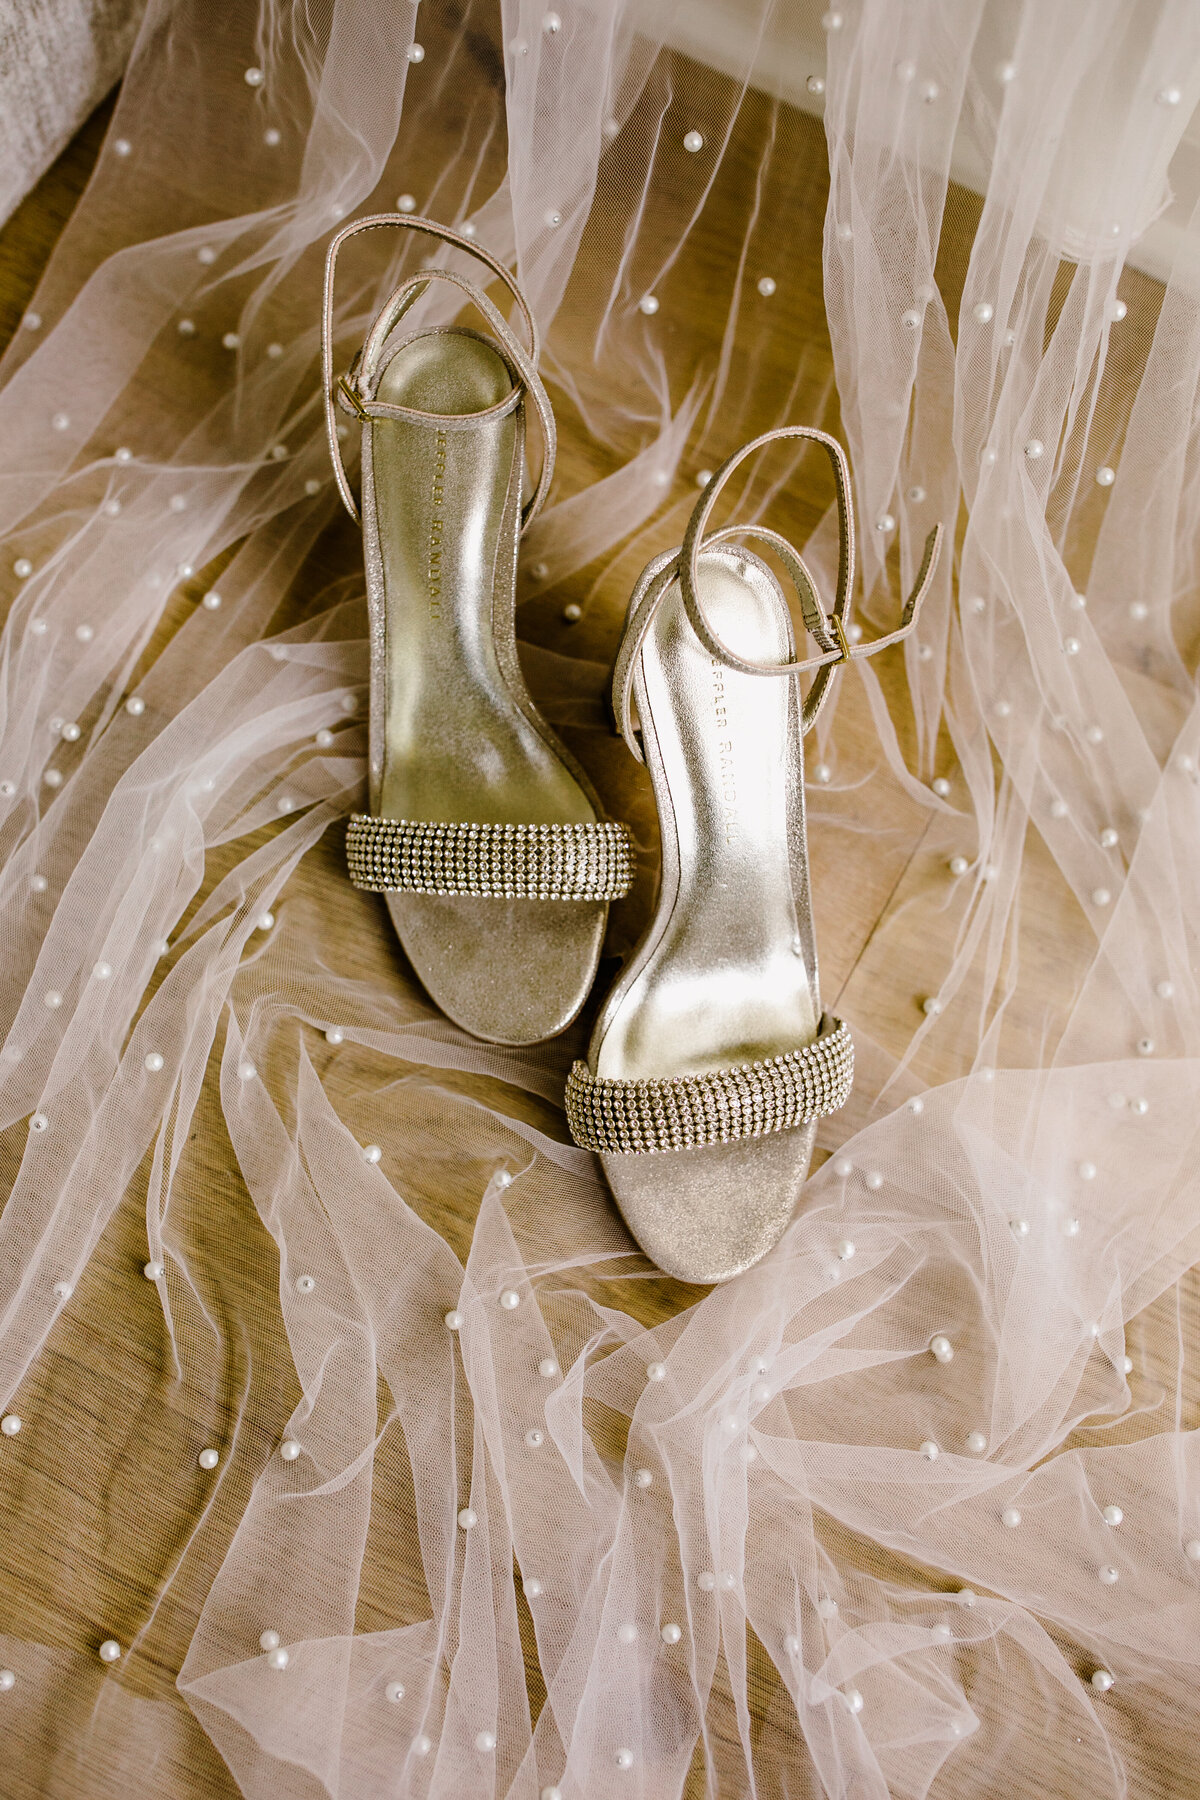 Wedding shoes sitting on veil with pearl details